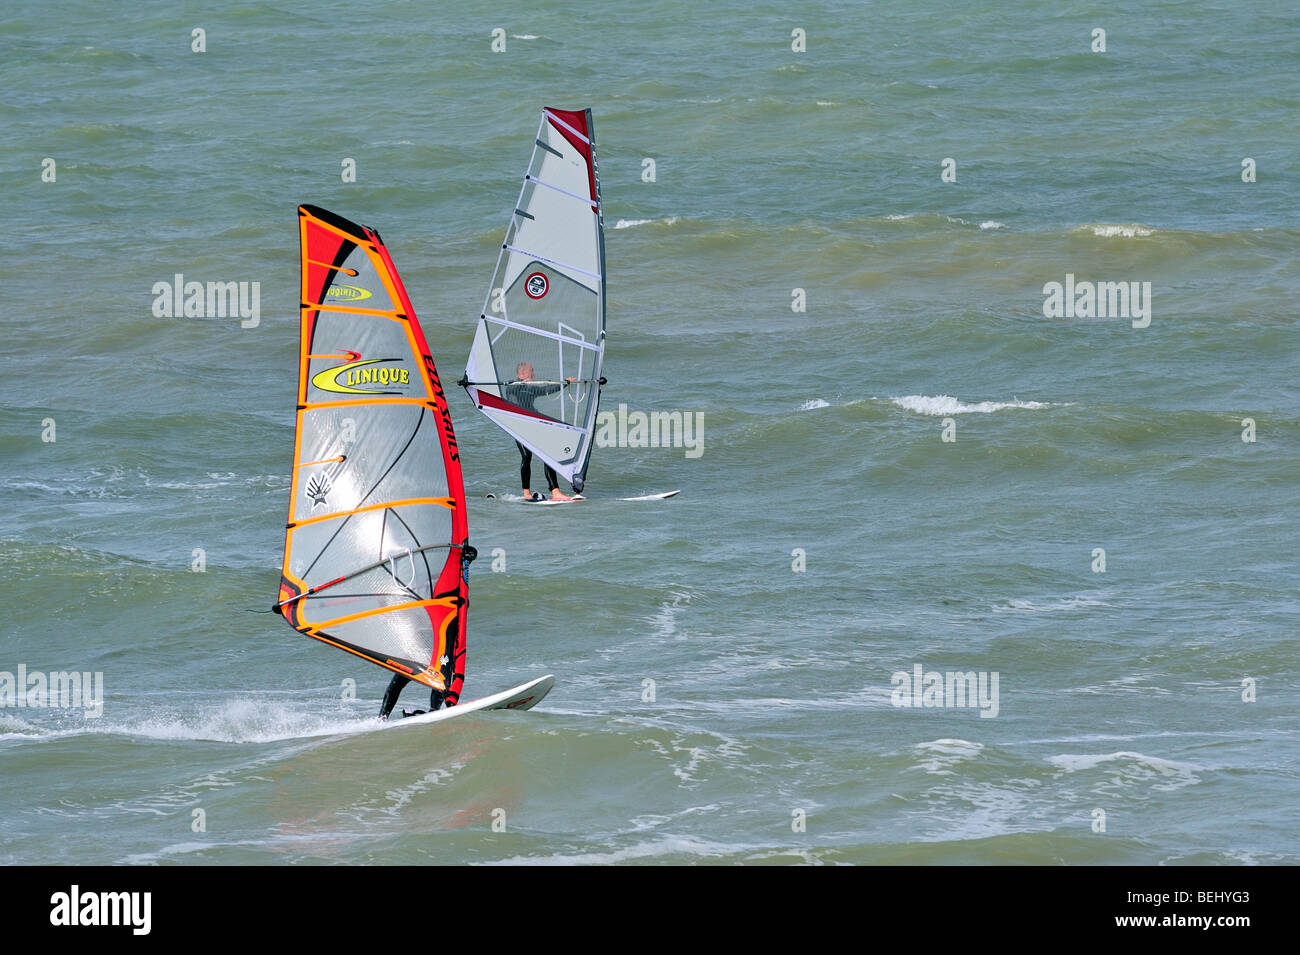 Two windsurfers sailing in the surf at sea Stock Photo